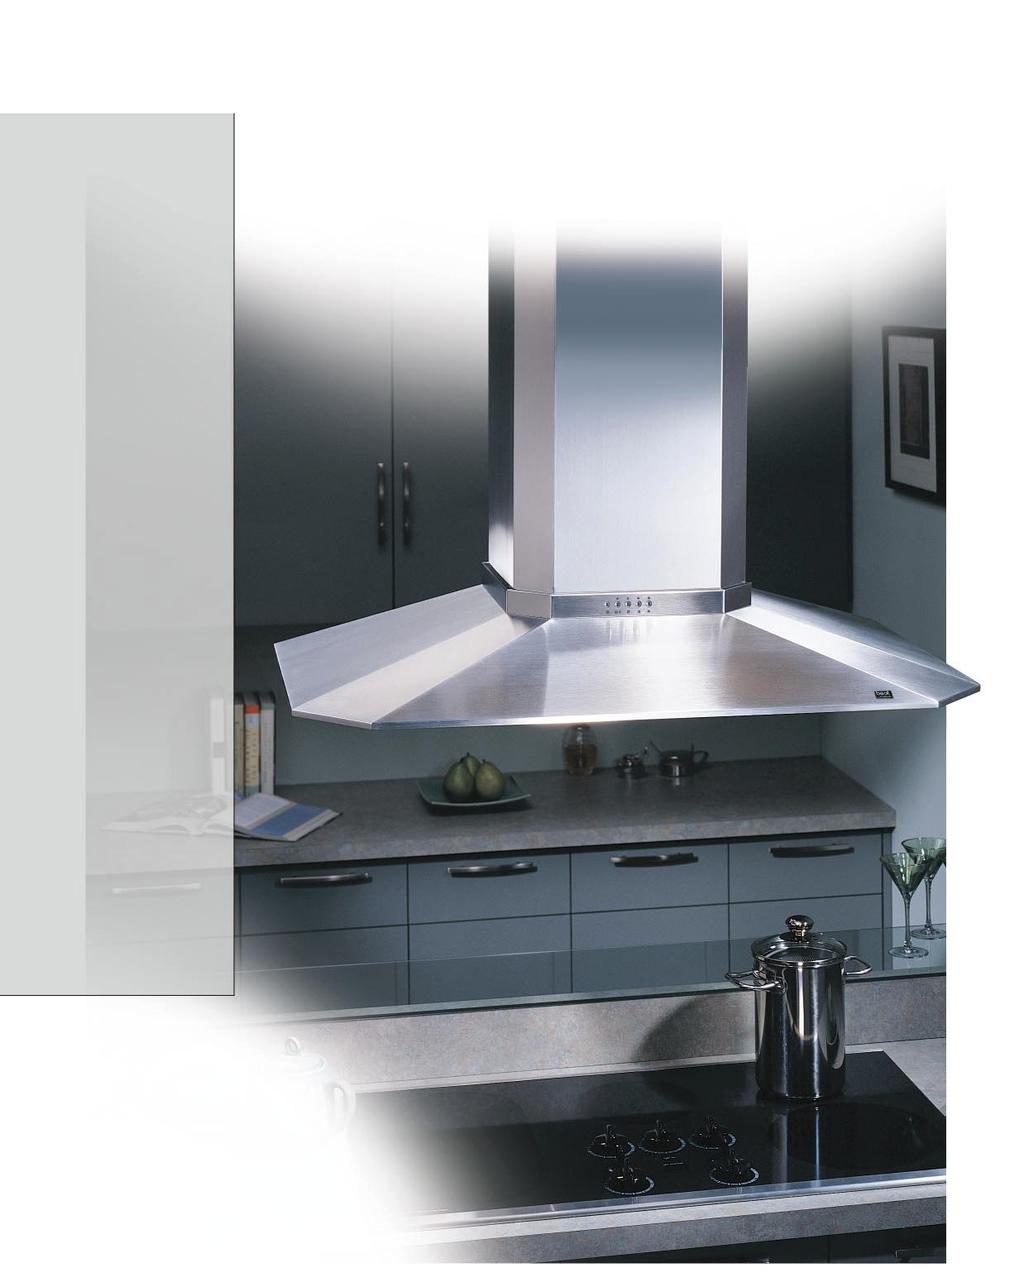 ISLAND HOODS IS170 Slim-line, multi-faceted design in beautiful brushed stainless, or two durable powder coated colors Powerful yet quiet internal and external blowers with HVI certified performance